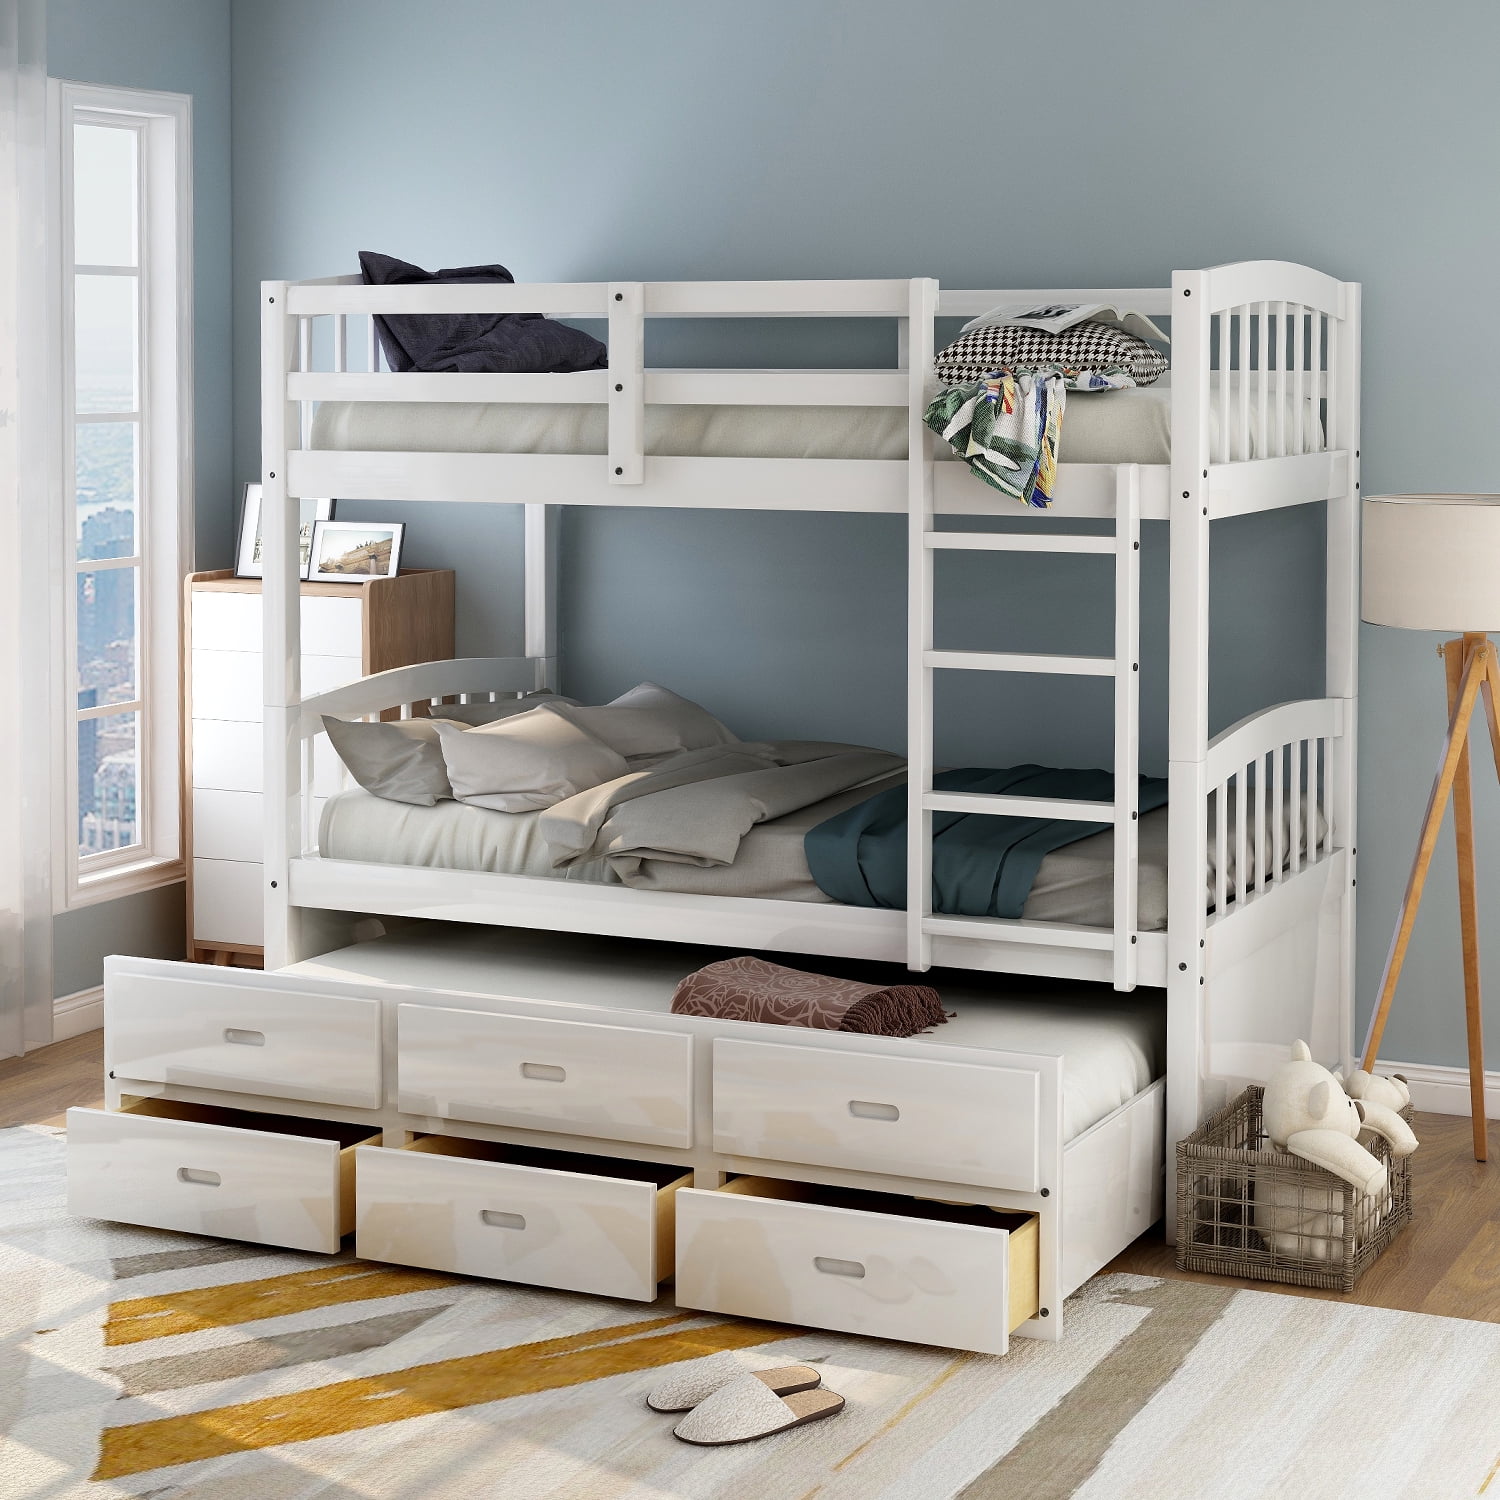 Euroco Twin Over Wood Bunk Bed, Wooden Bunk Bed With Trundle And Storage